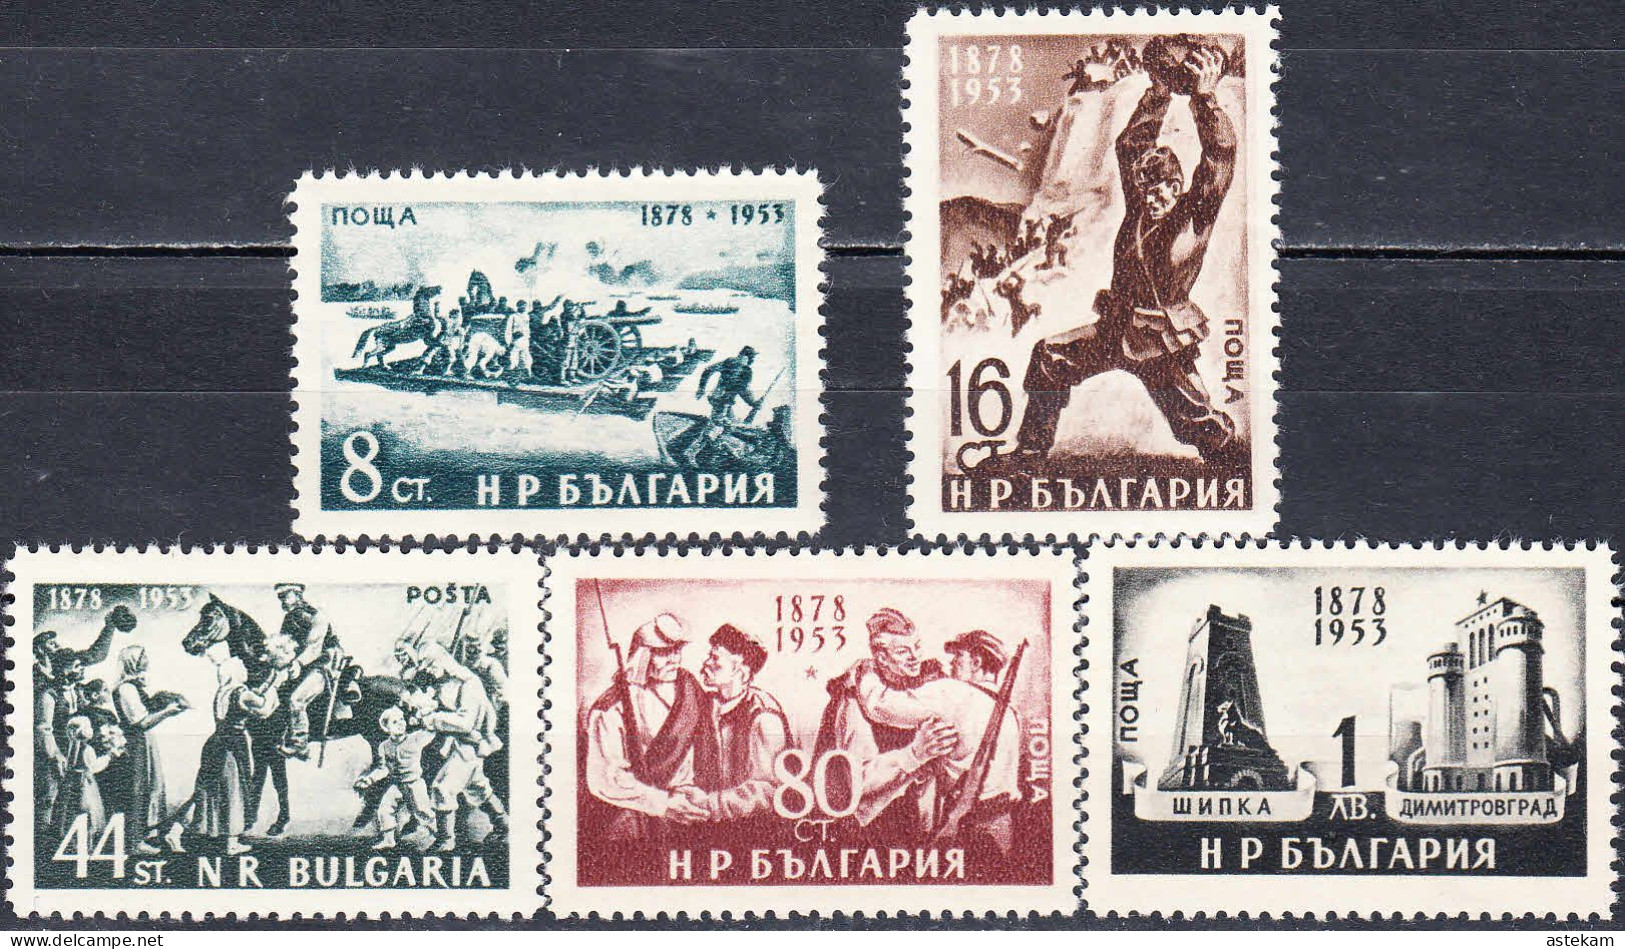 BULGARIA 1953, 75 YEARS Since LIBERATION Of TURKISH SLAVERY, COMPLETE, MNH SERIES With GOOD QUALITY, *** - Neufs